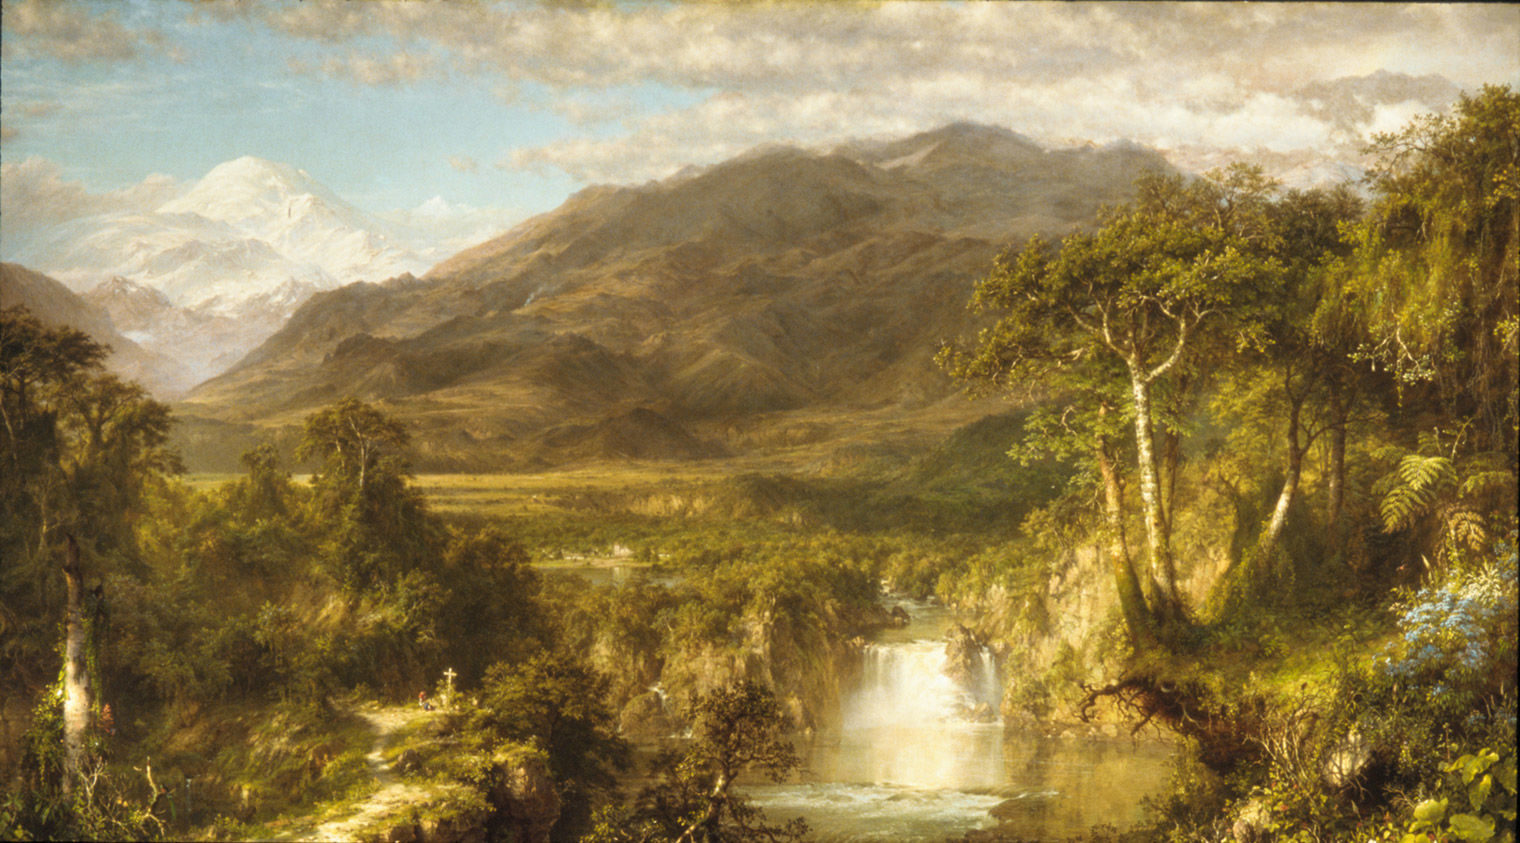 A landscape with a large snow-covered mountain in the distant background, large rocky mountains in the near background, open plains in the middle ground and a lush forest with a raging river and waterfall in the foreground